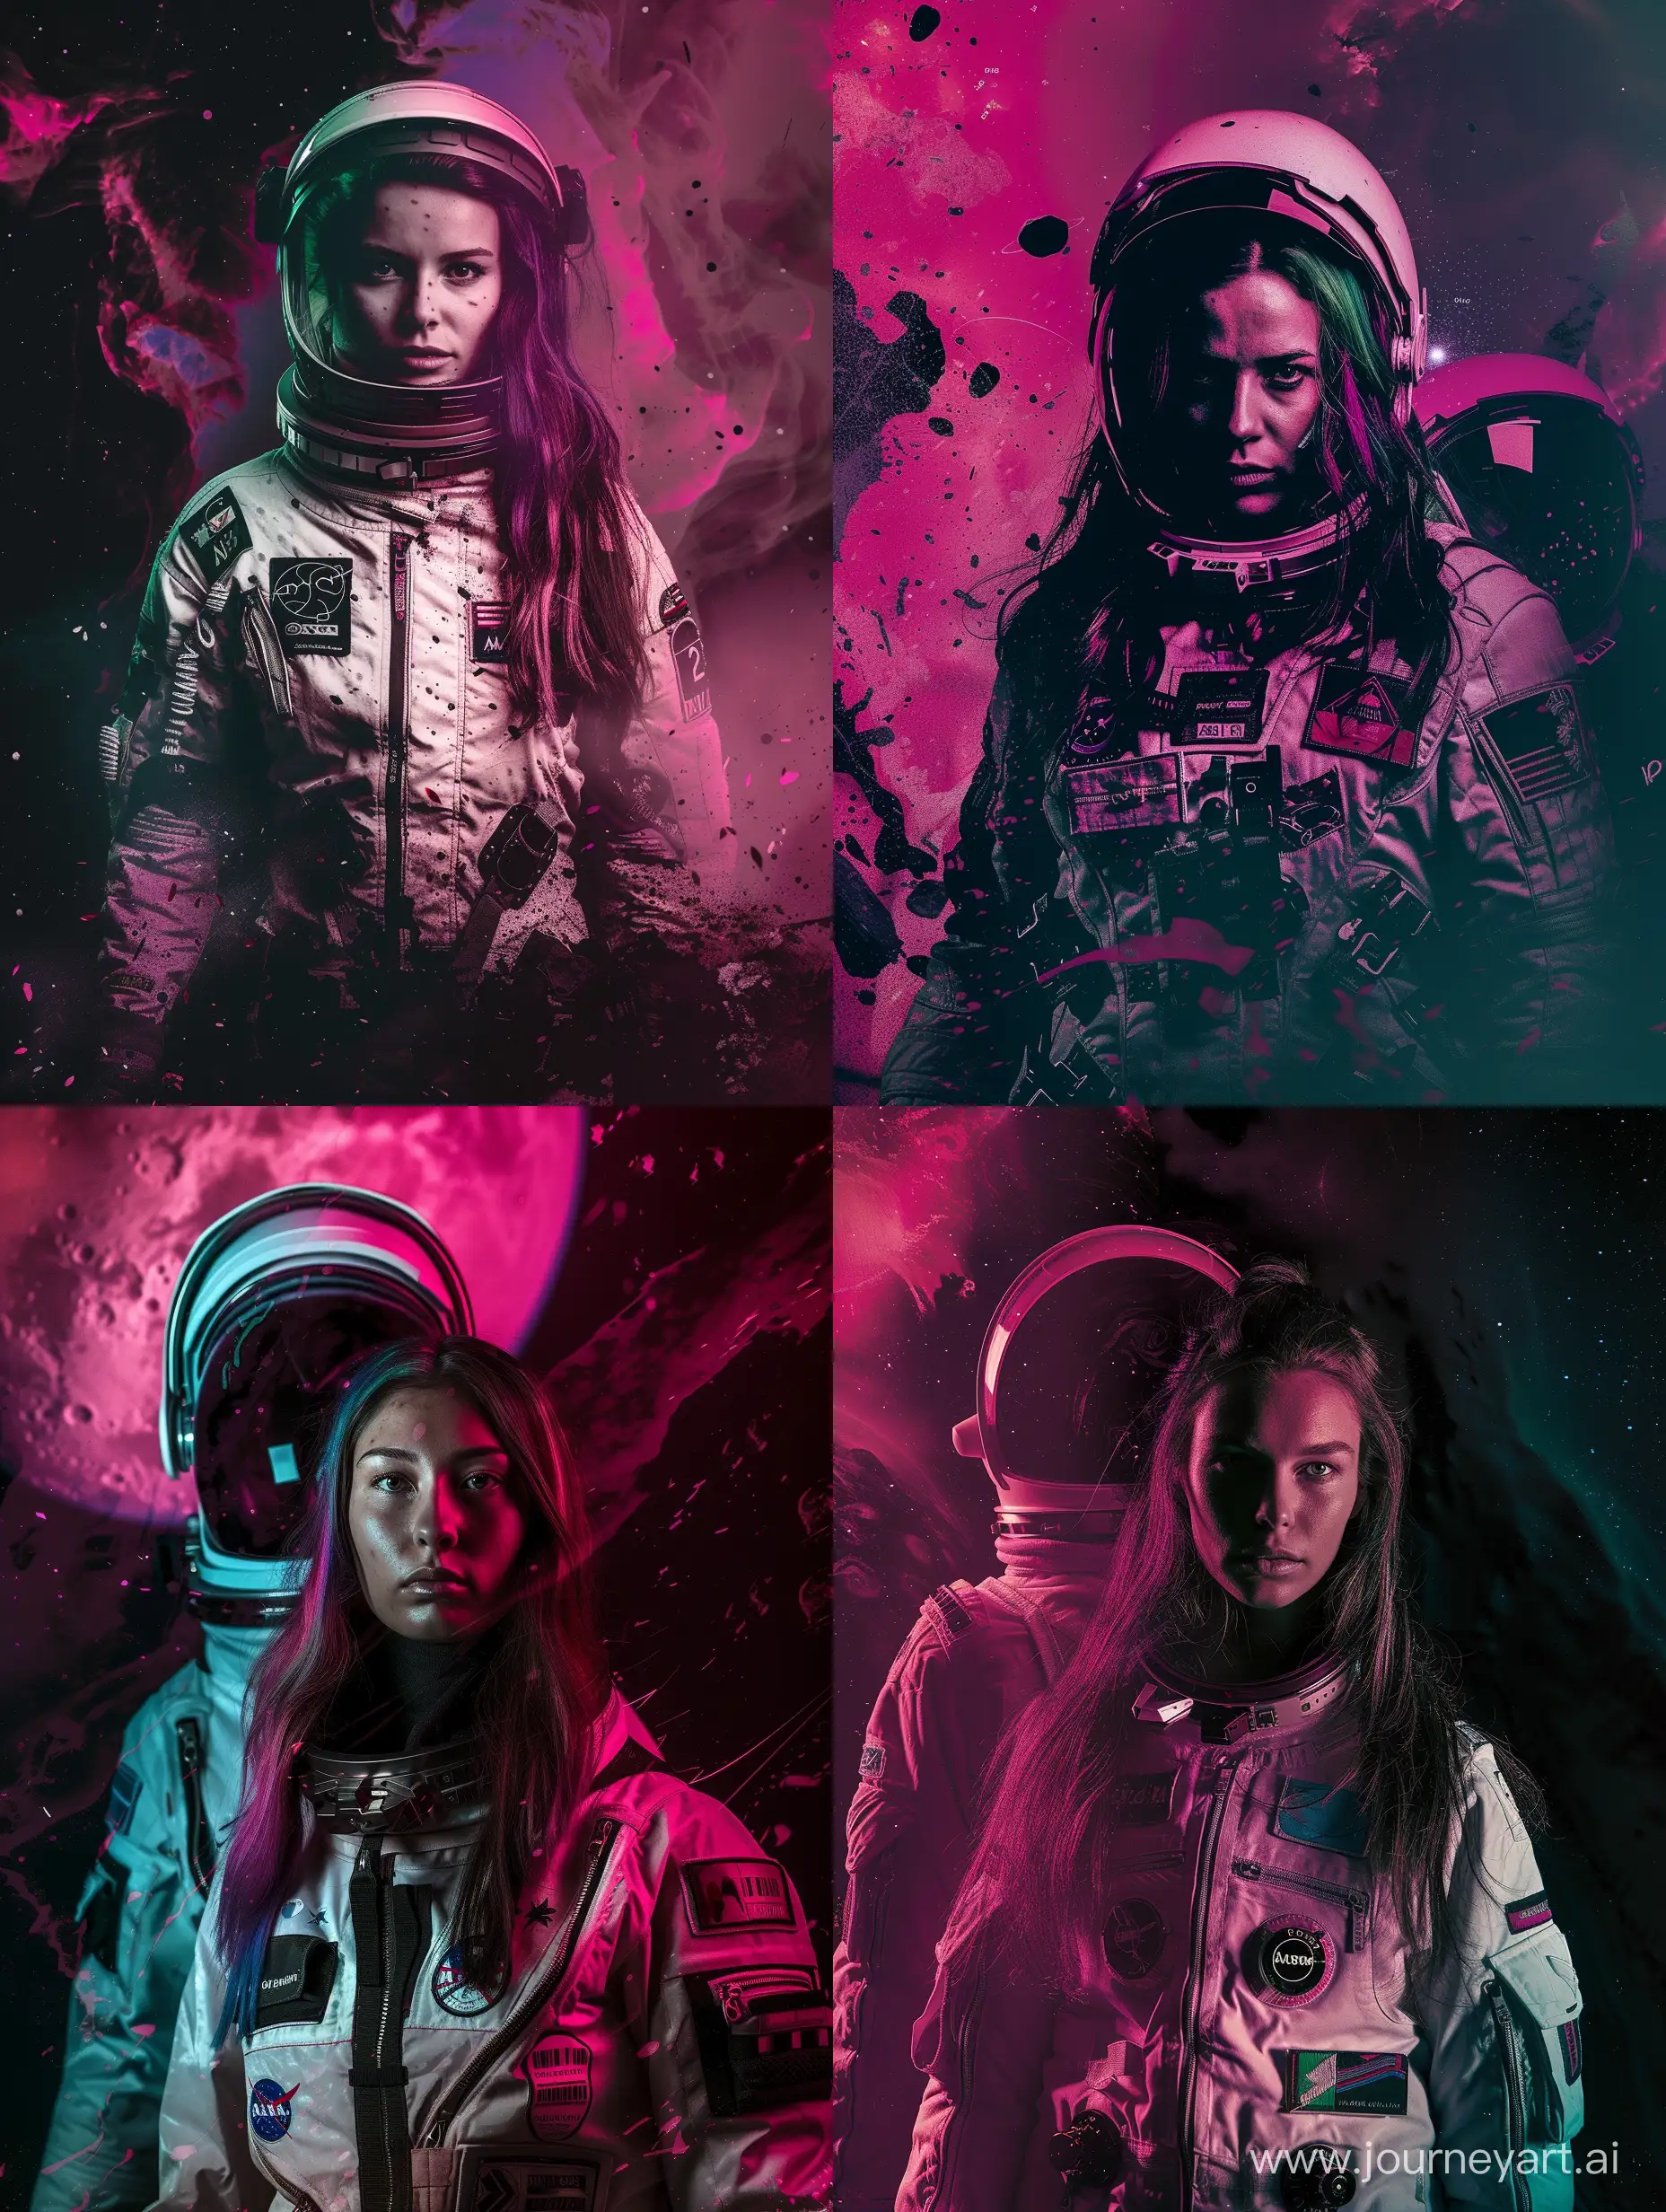 In this image, we see a woman wearing a space suit standing in front of a dark background. The dominant colors are black and pink, with the accent color being a deep burgundy. The woman's face is the main focus of the image, as she stares directly at the camera with an intense expression. She appears to be around 21 years old and has long hair that is dyed in vibrant shades of purple, blue, and green.

The woman's outfit consists of a white space suit with various patches and logos on it. A close-up shot reveals intricate details such as zippers and buttons on her suit. Her helmet is partially visible behind her head, adding to the futuristic feel of the image.

Behind her stands what appears to be outer space or some kind of abstract background filled with stars and galaxies. This adds to the overall theme of exploration and adventure portrayed by this photograph.